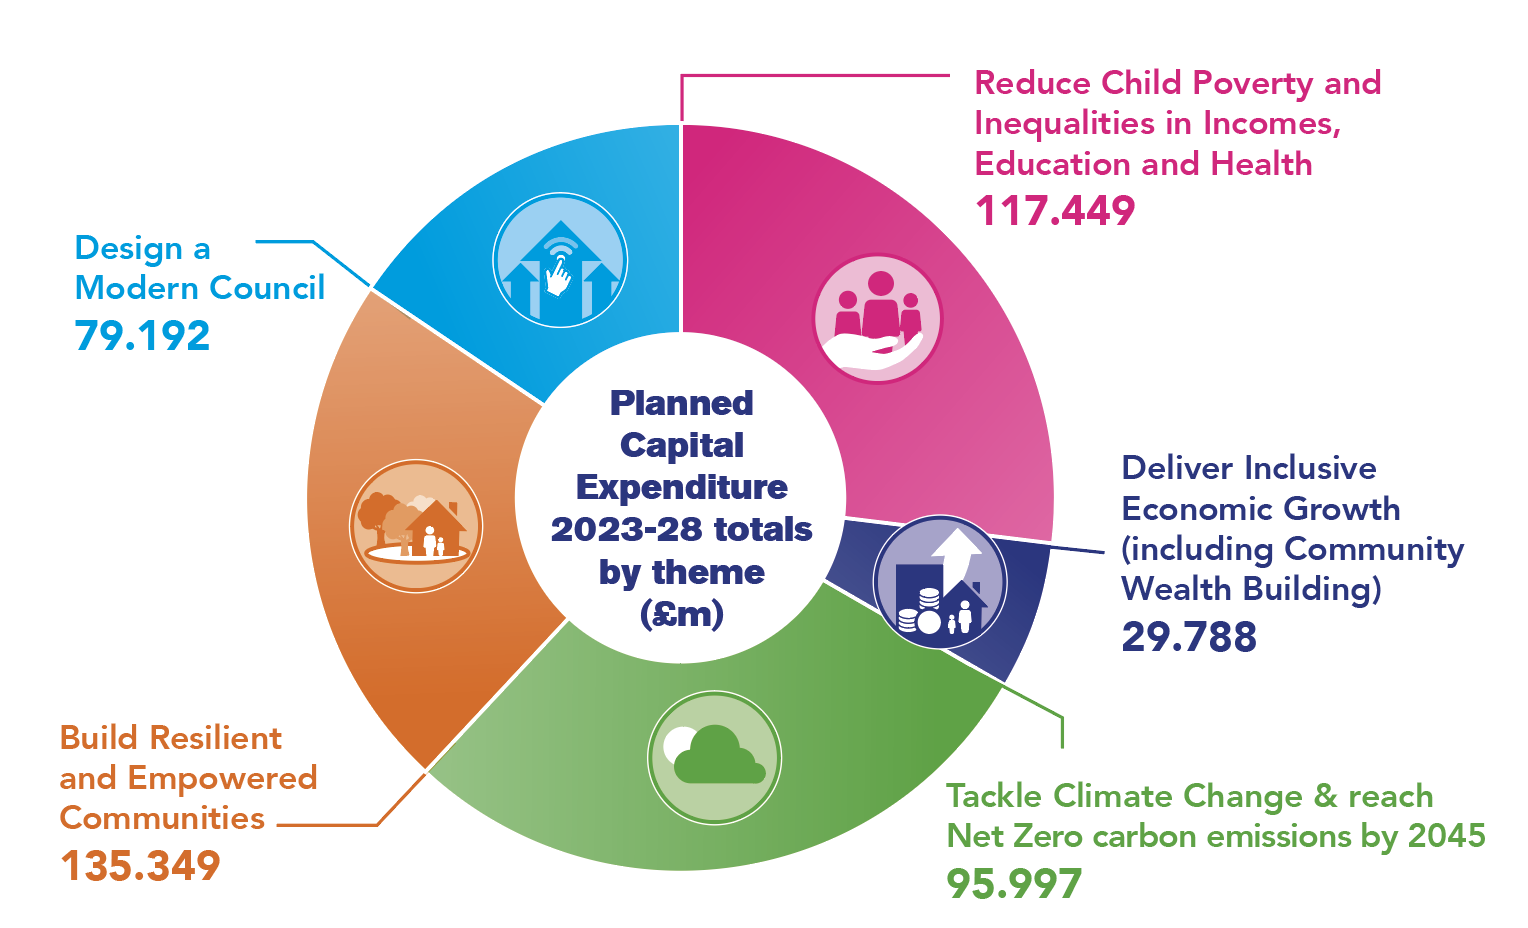 The image shows the planned capital expenditure 2023-28 total by council plan priority